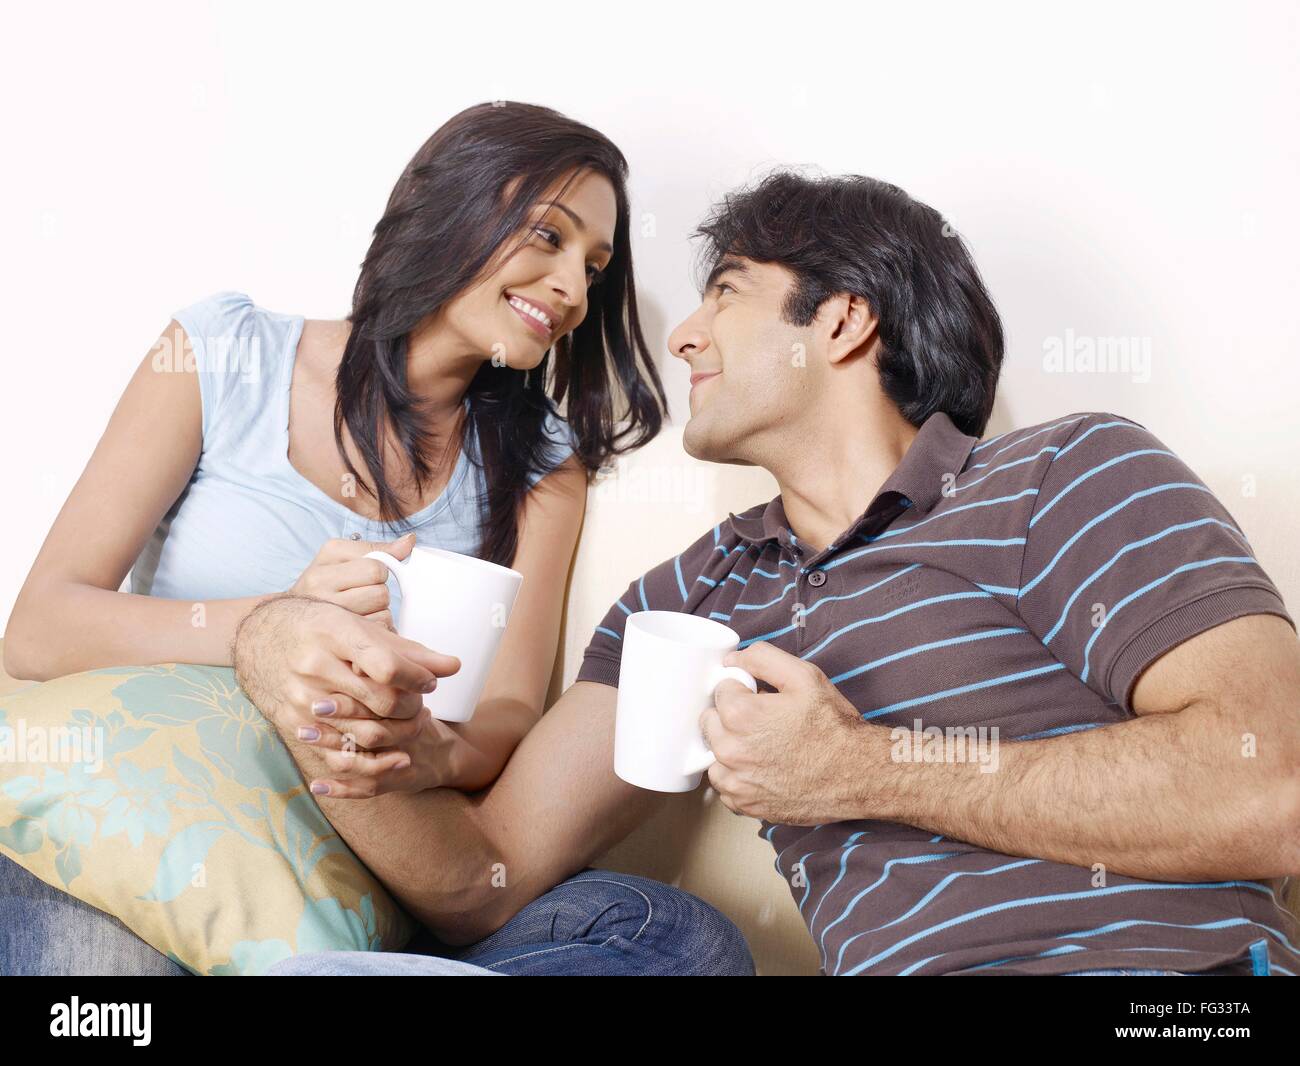 Young man and woman holding hands looking at each other MR#702V,702U Stock Photo